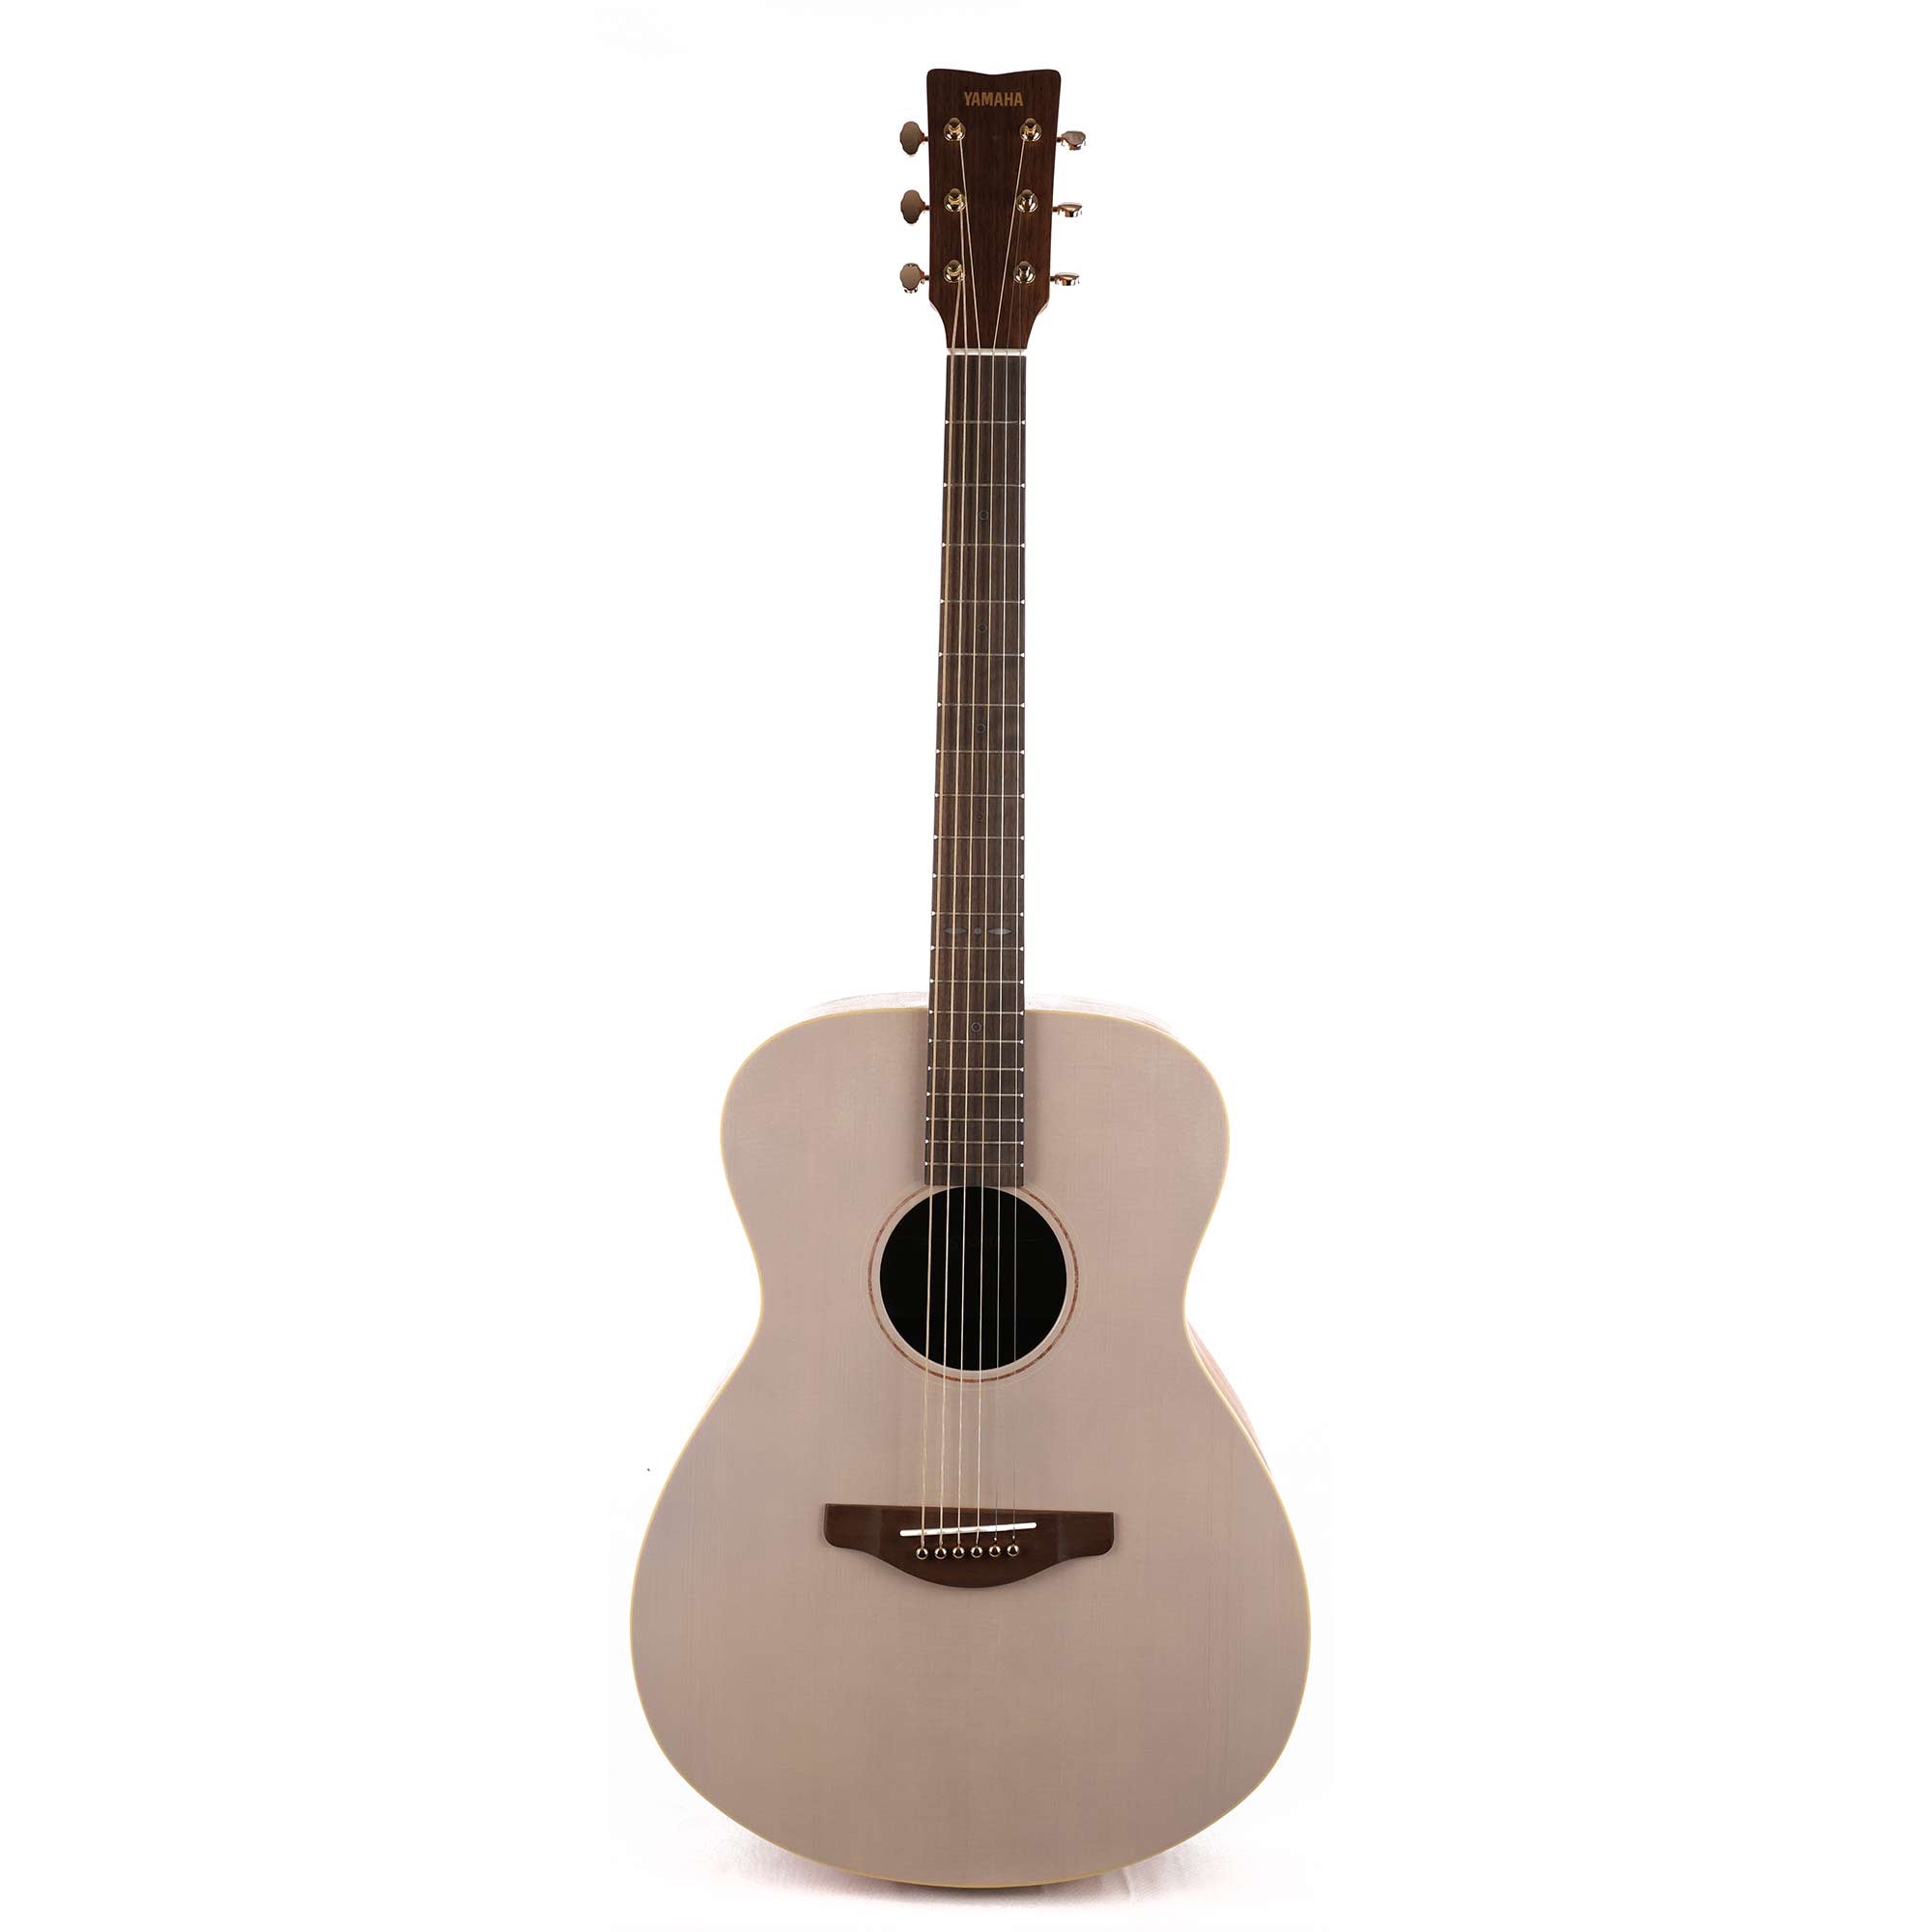 Yamaha Storia I Acoustic-Electric Guitar Off-White Used | The Music Zoo